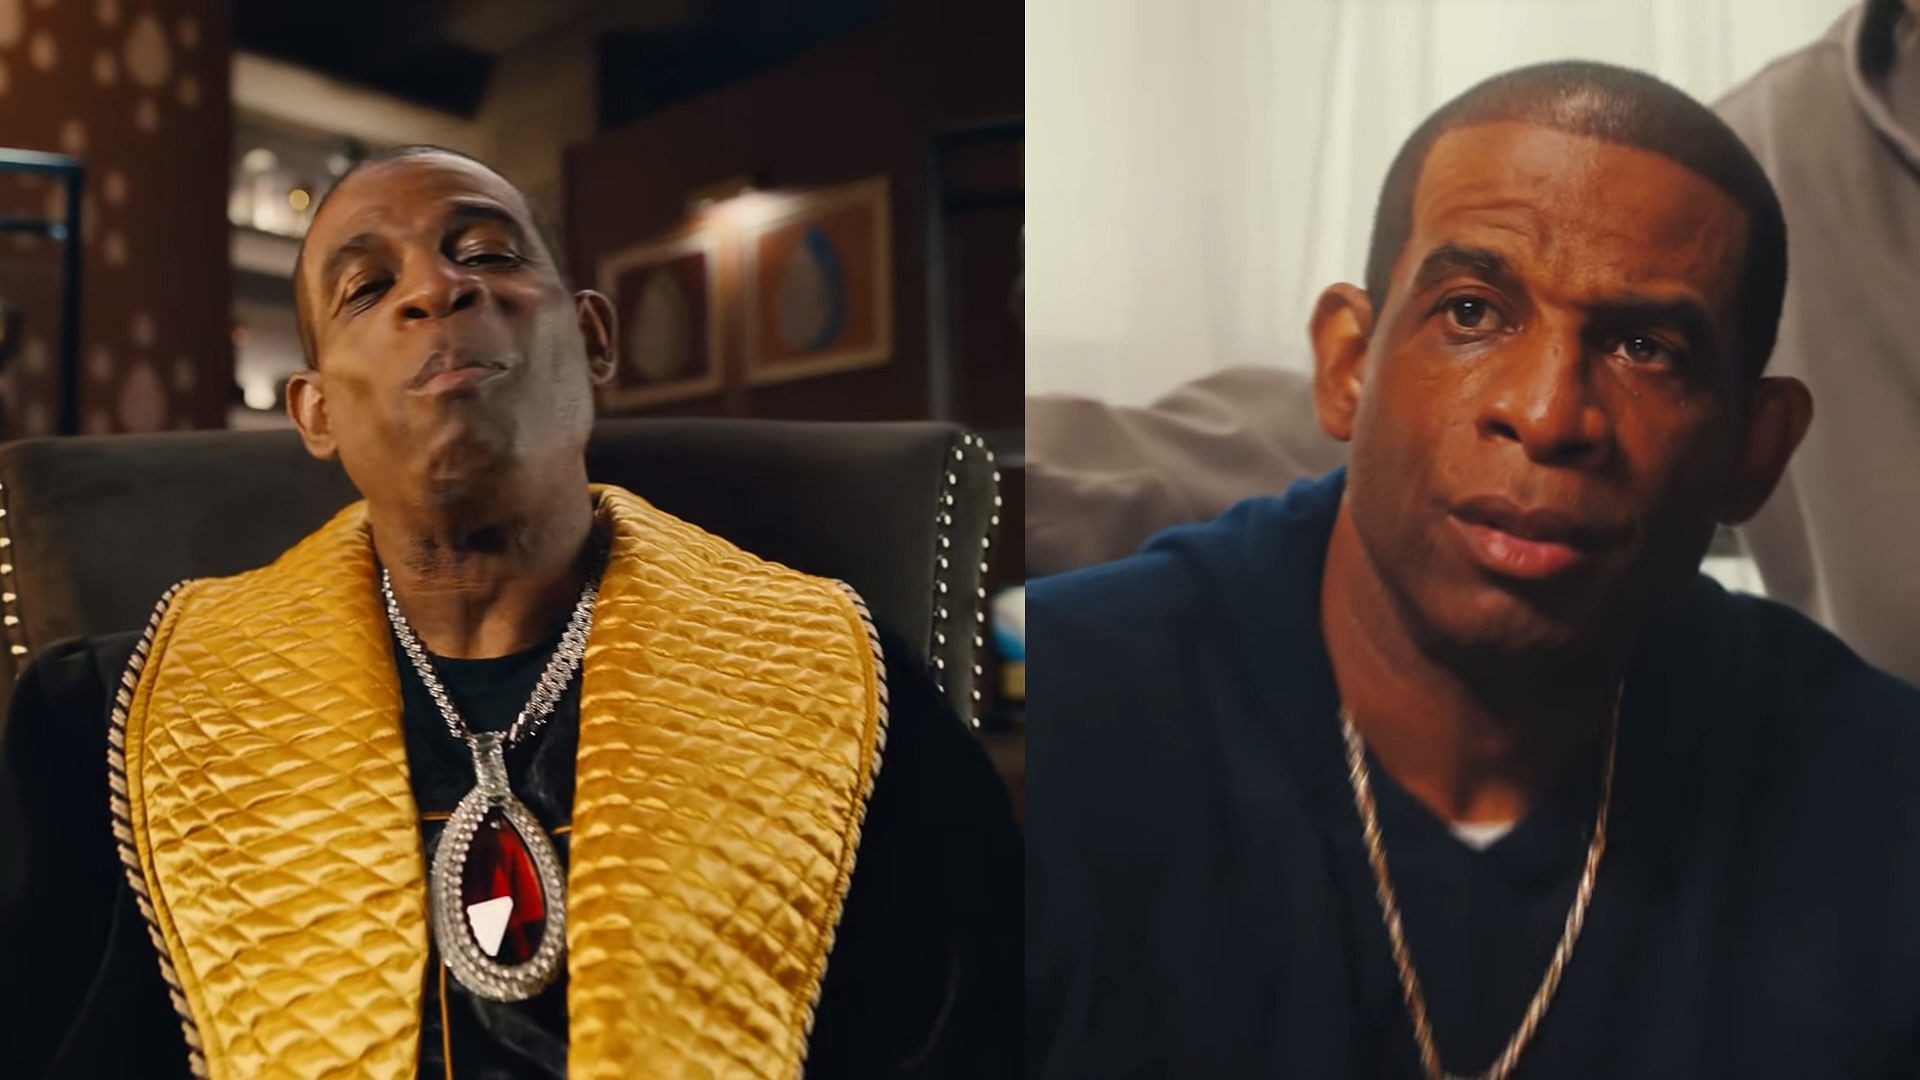 Deion Sanders in KFC and Almond commercial